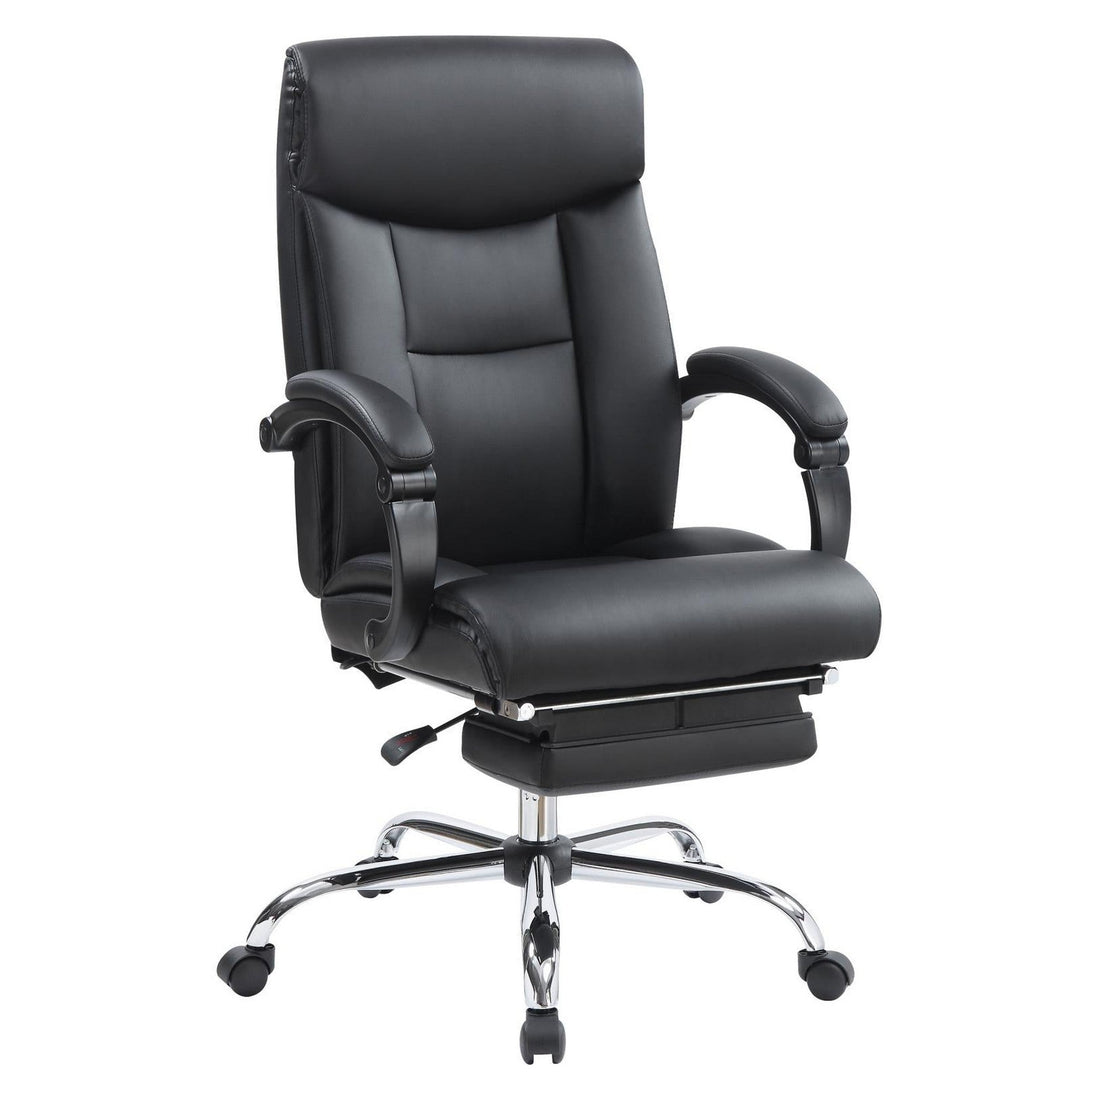 Adjustable Height Office Chair Black and Chrome 801318